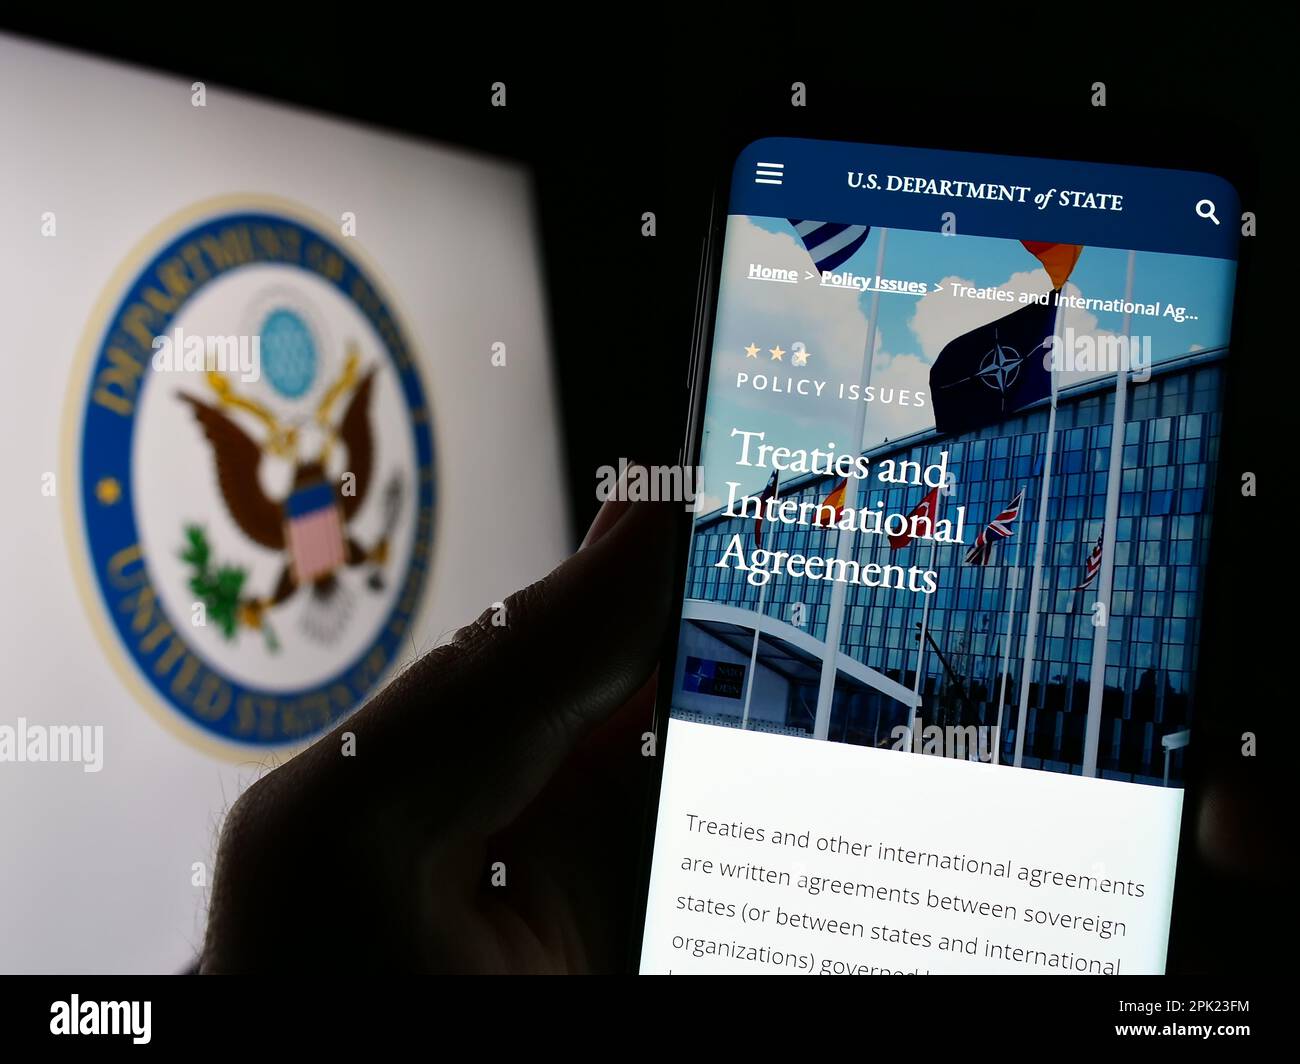 Person holding cellphone with web page of United States Department of State (DOS) on screen in front of logo. Focus on center of phone display. Stock Photo